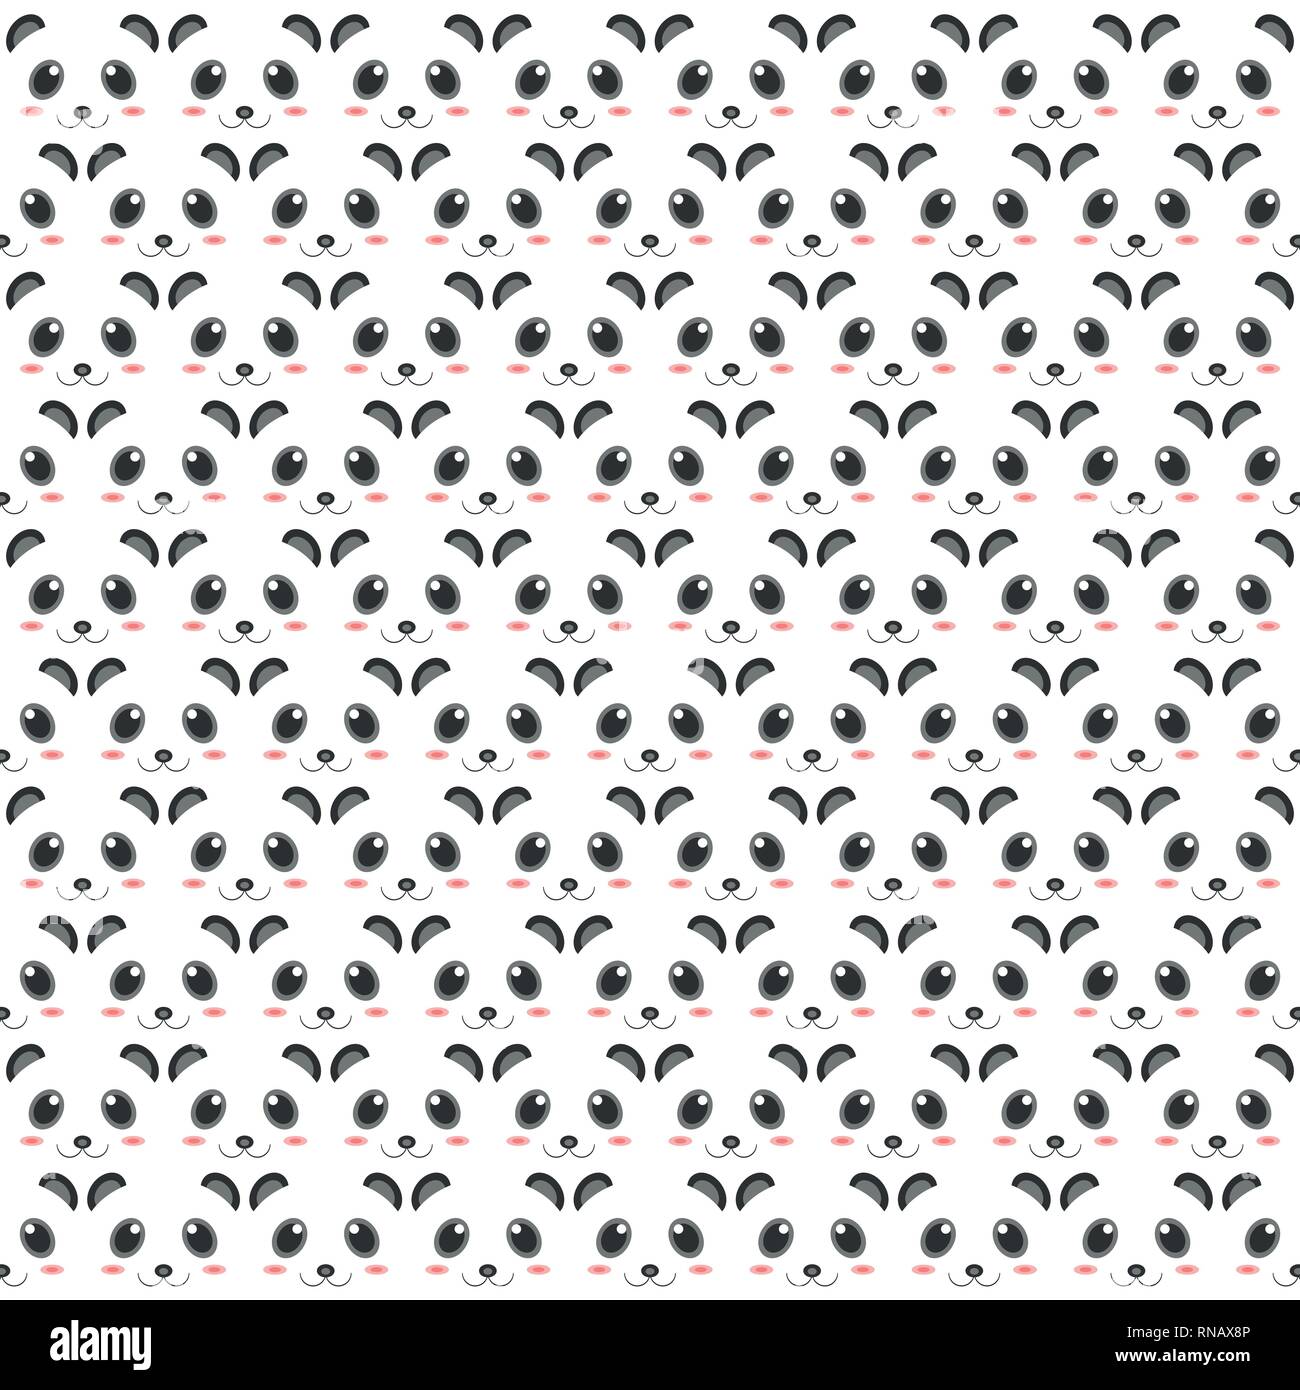 Panda pattern of heads decoration design. 2d style of animation artwork. You can use for background, cover, artwork, print. vector eps10 Stock Vector